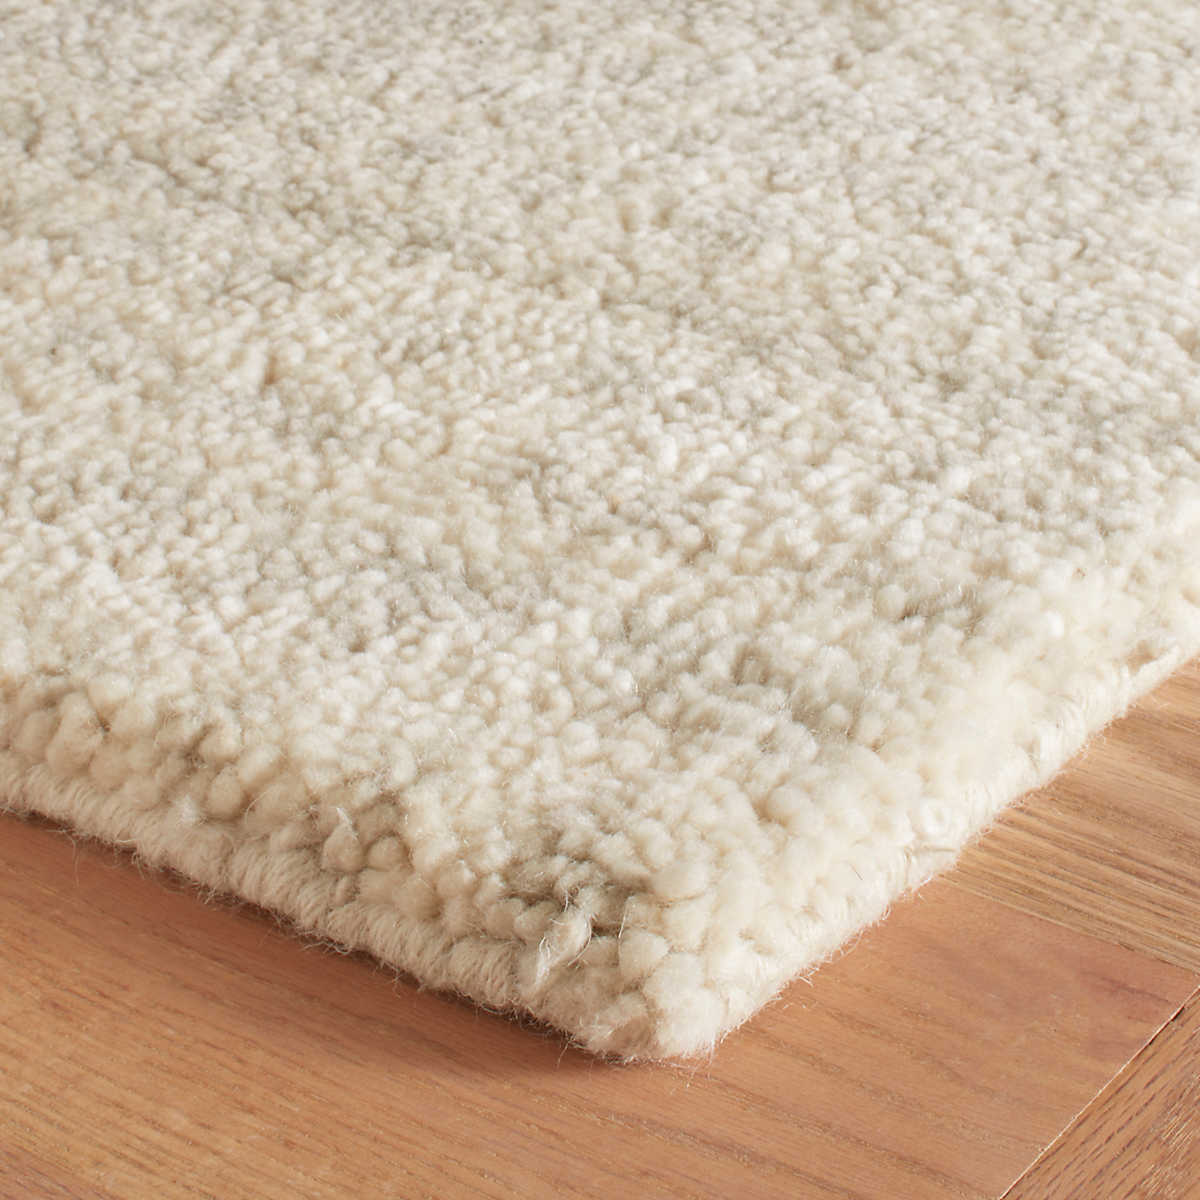 The Shepherd Plaster Rug deeply dense and cushy pile serves to highlight the beauty of the unbleached color variations of natural wool fleece. The random stippling of irregularly shaped splotches is a signature motif of Marie Flanigan, an award-winning interior designer. Amethyst Home provides interior design services, furniture, rugs, and lighting in the Omaha metro area.